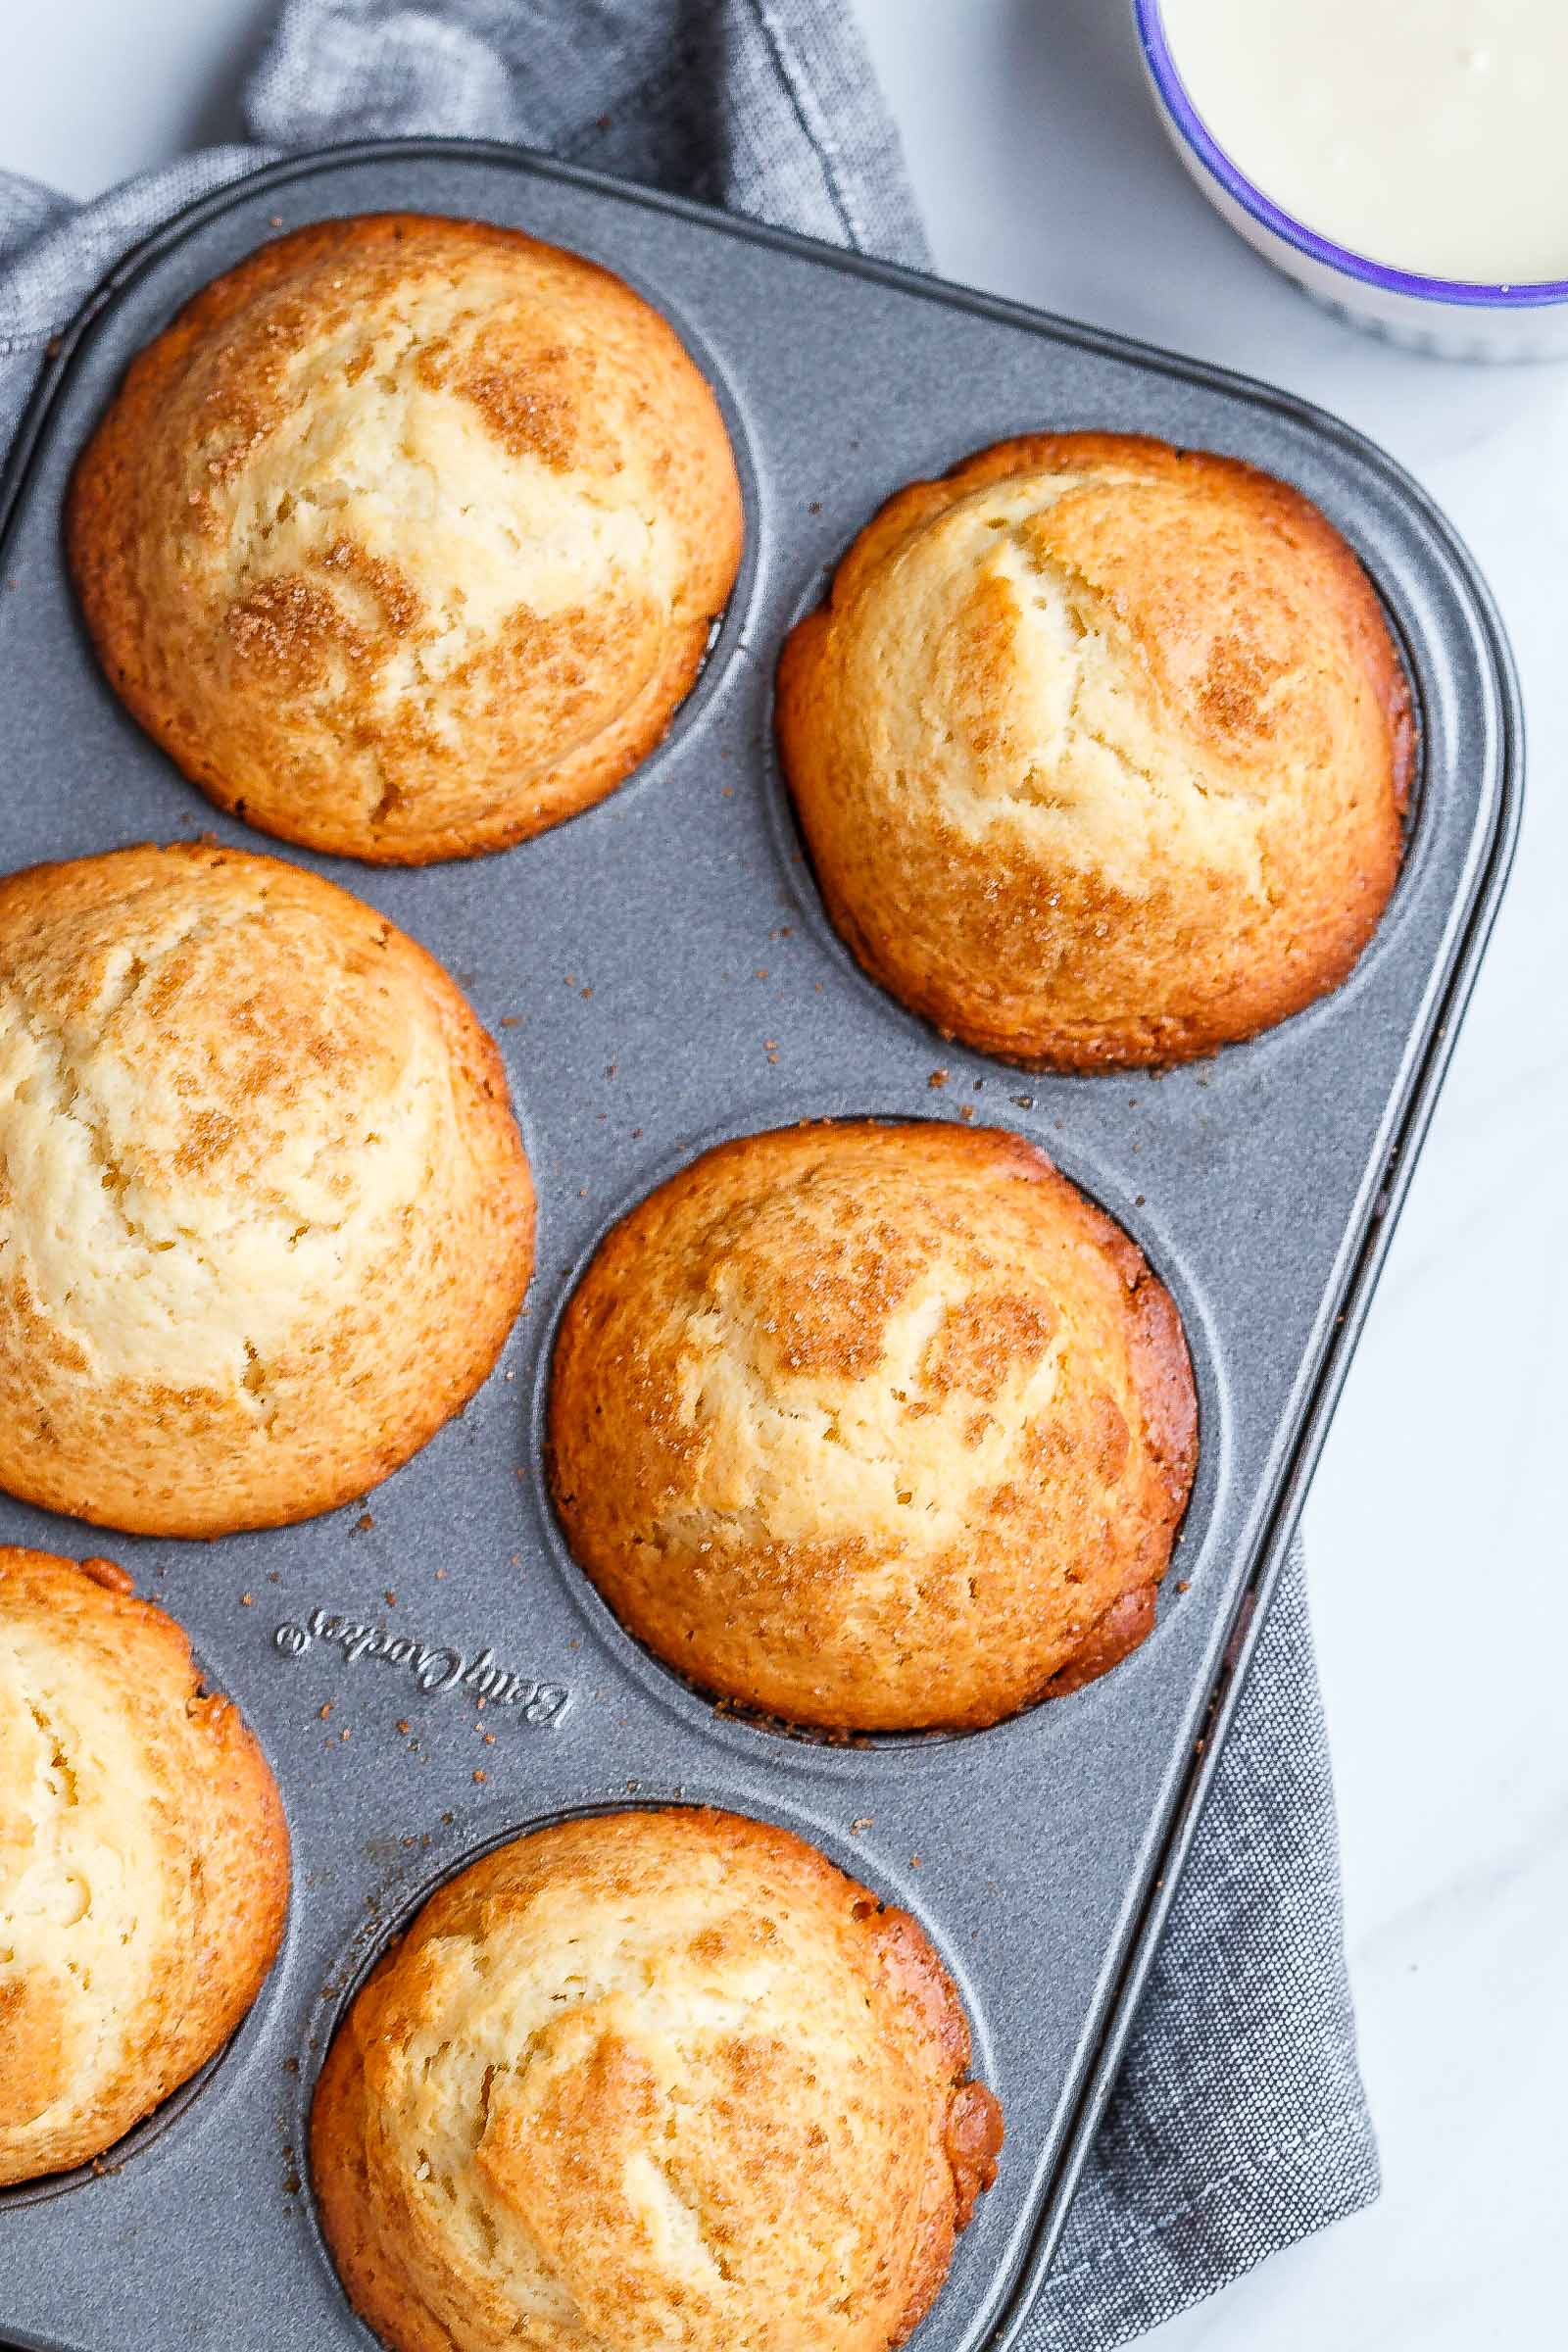 Brown Butter Lemon Muffins - Rich, moist and fluffy - The only recipe you need for a perfect grab-n-go breakfast. 